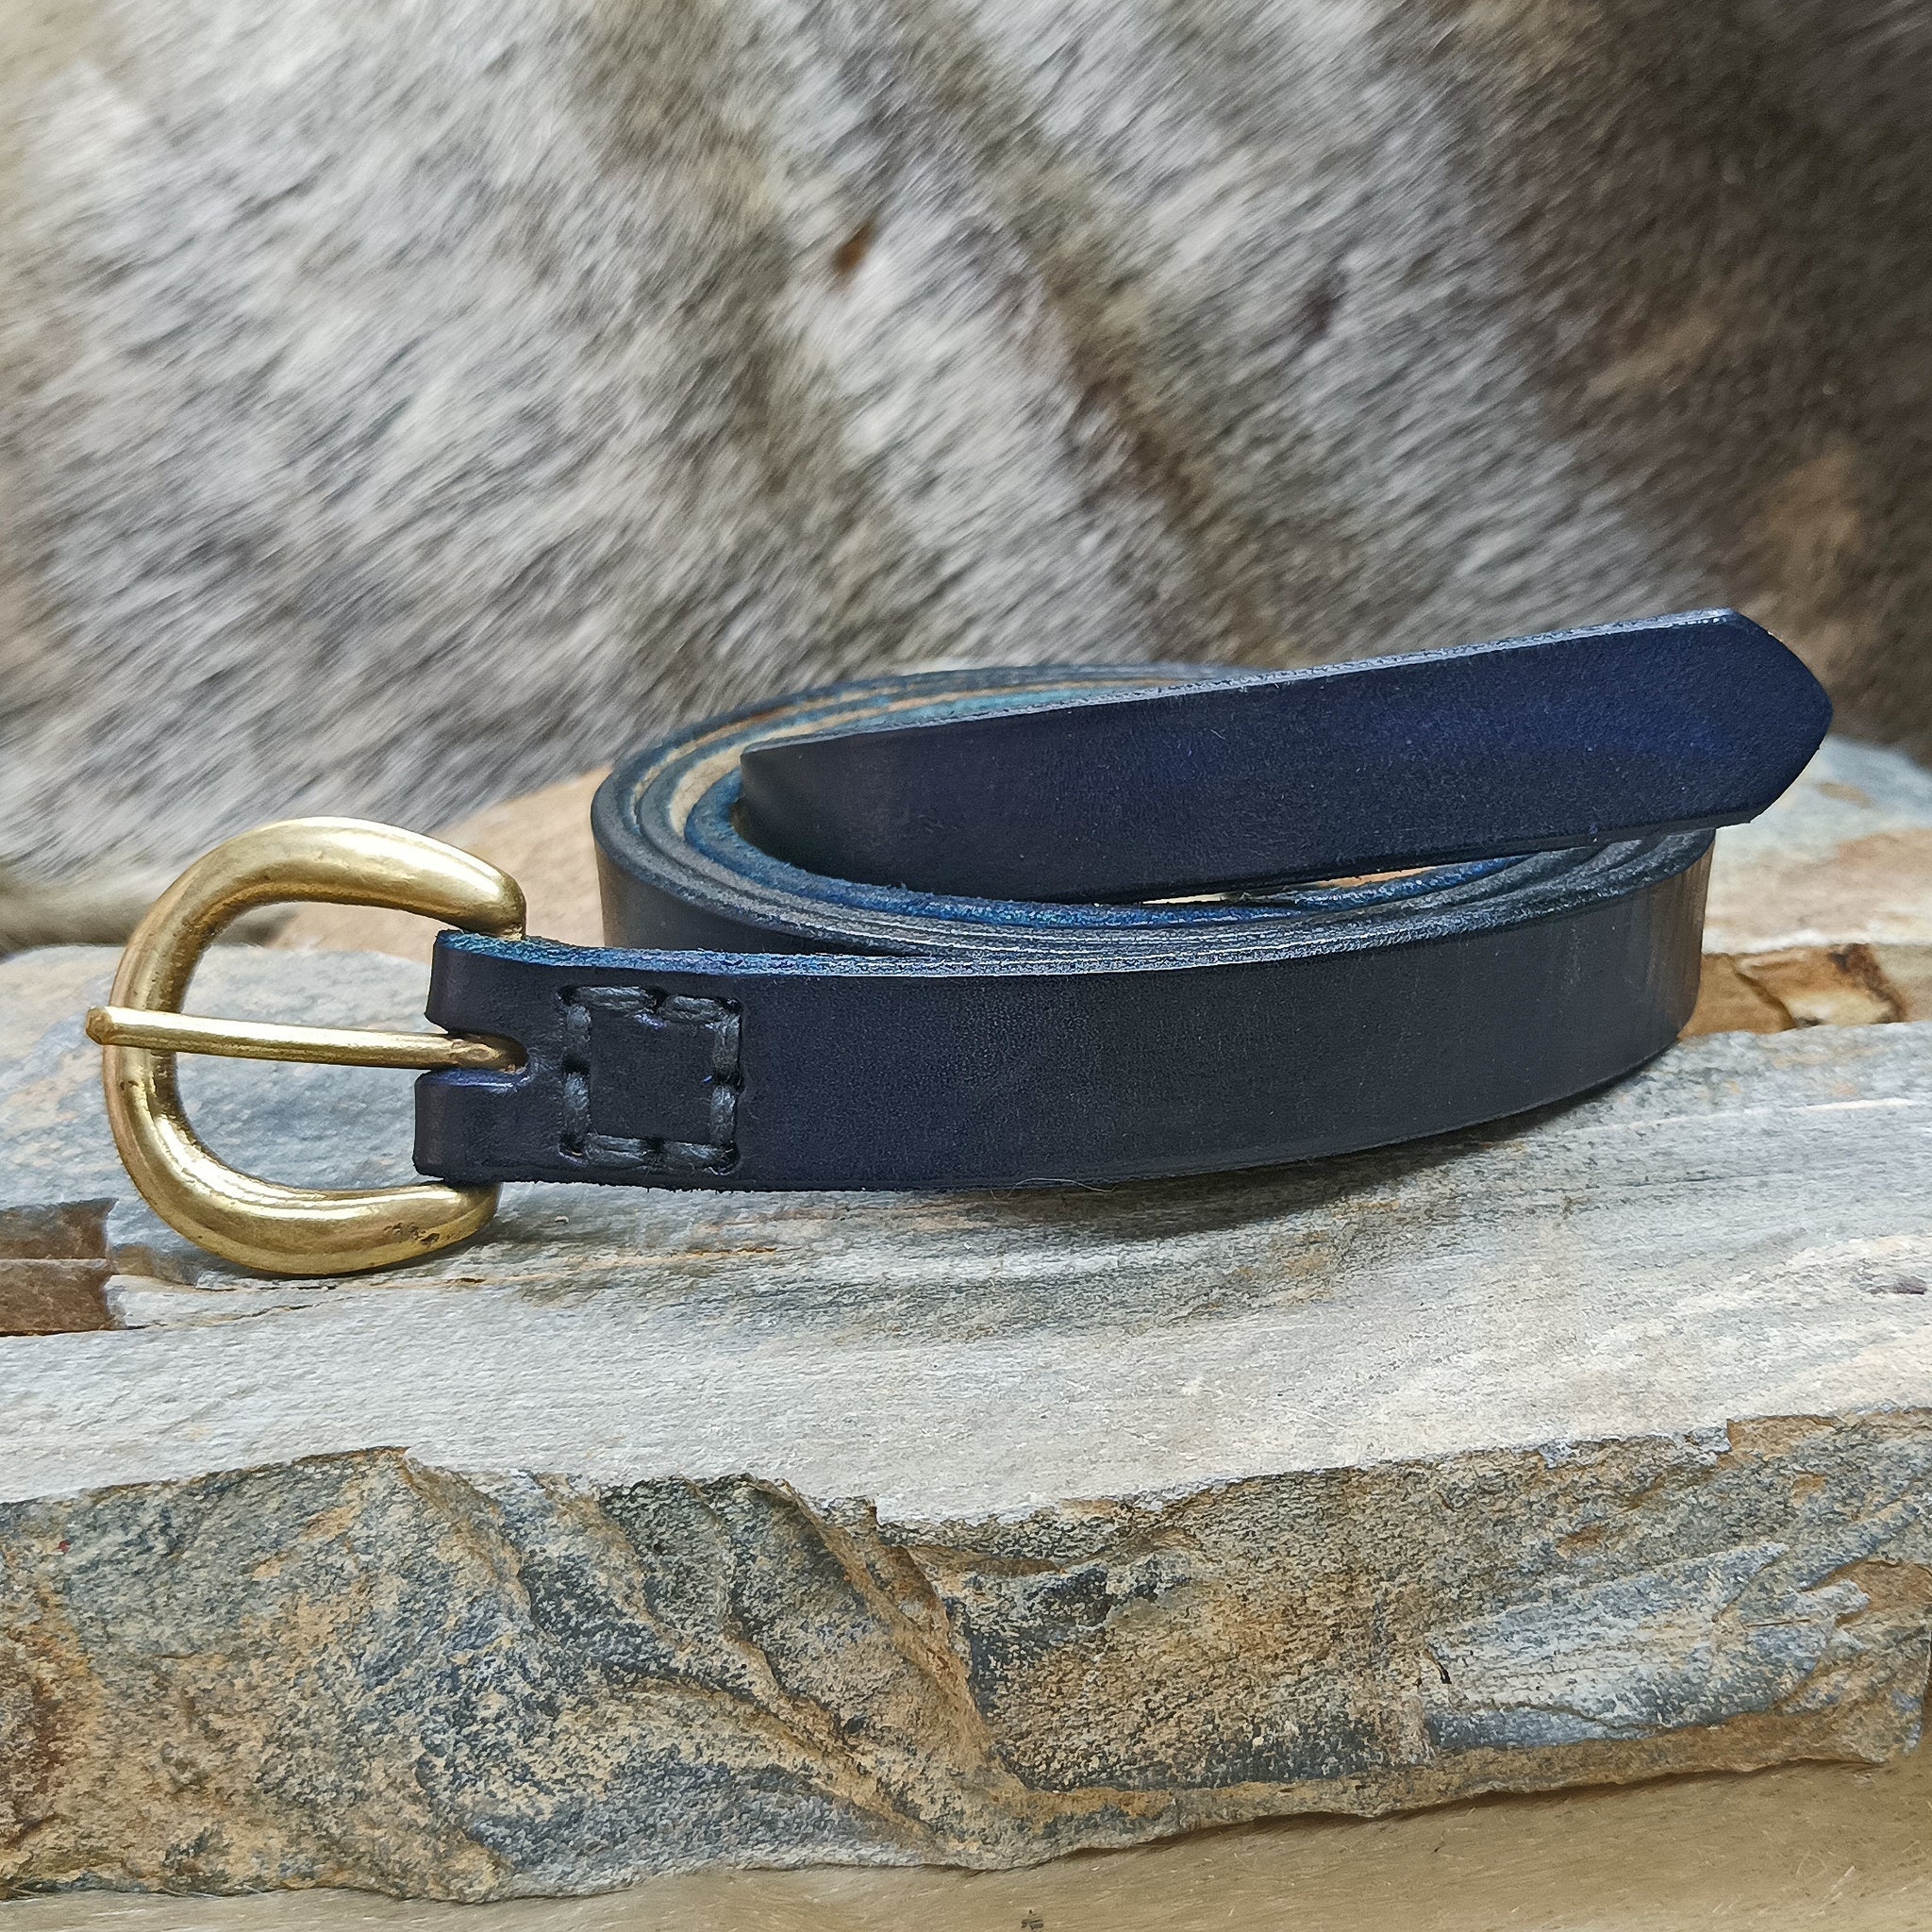 19mm Wide Leather Viking Belt with Brass Buckle - Blue